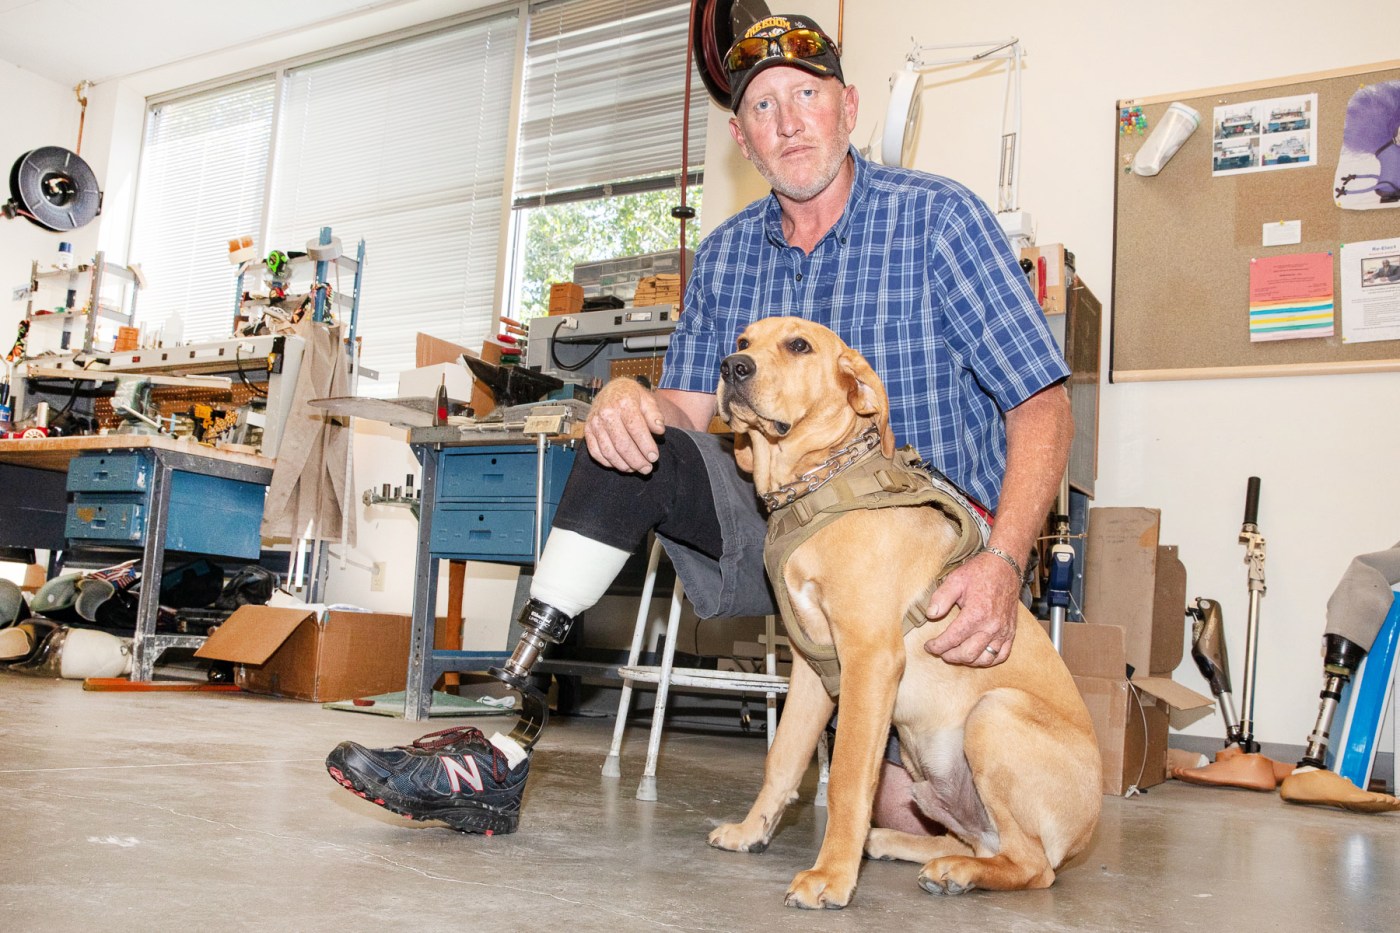 Community clinic is custom-fit ‘Jewell’ for prosthetic patient